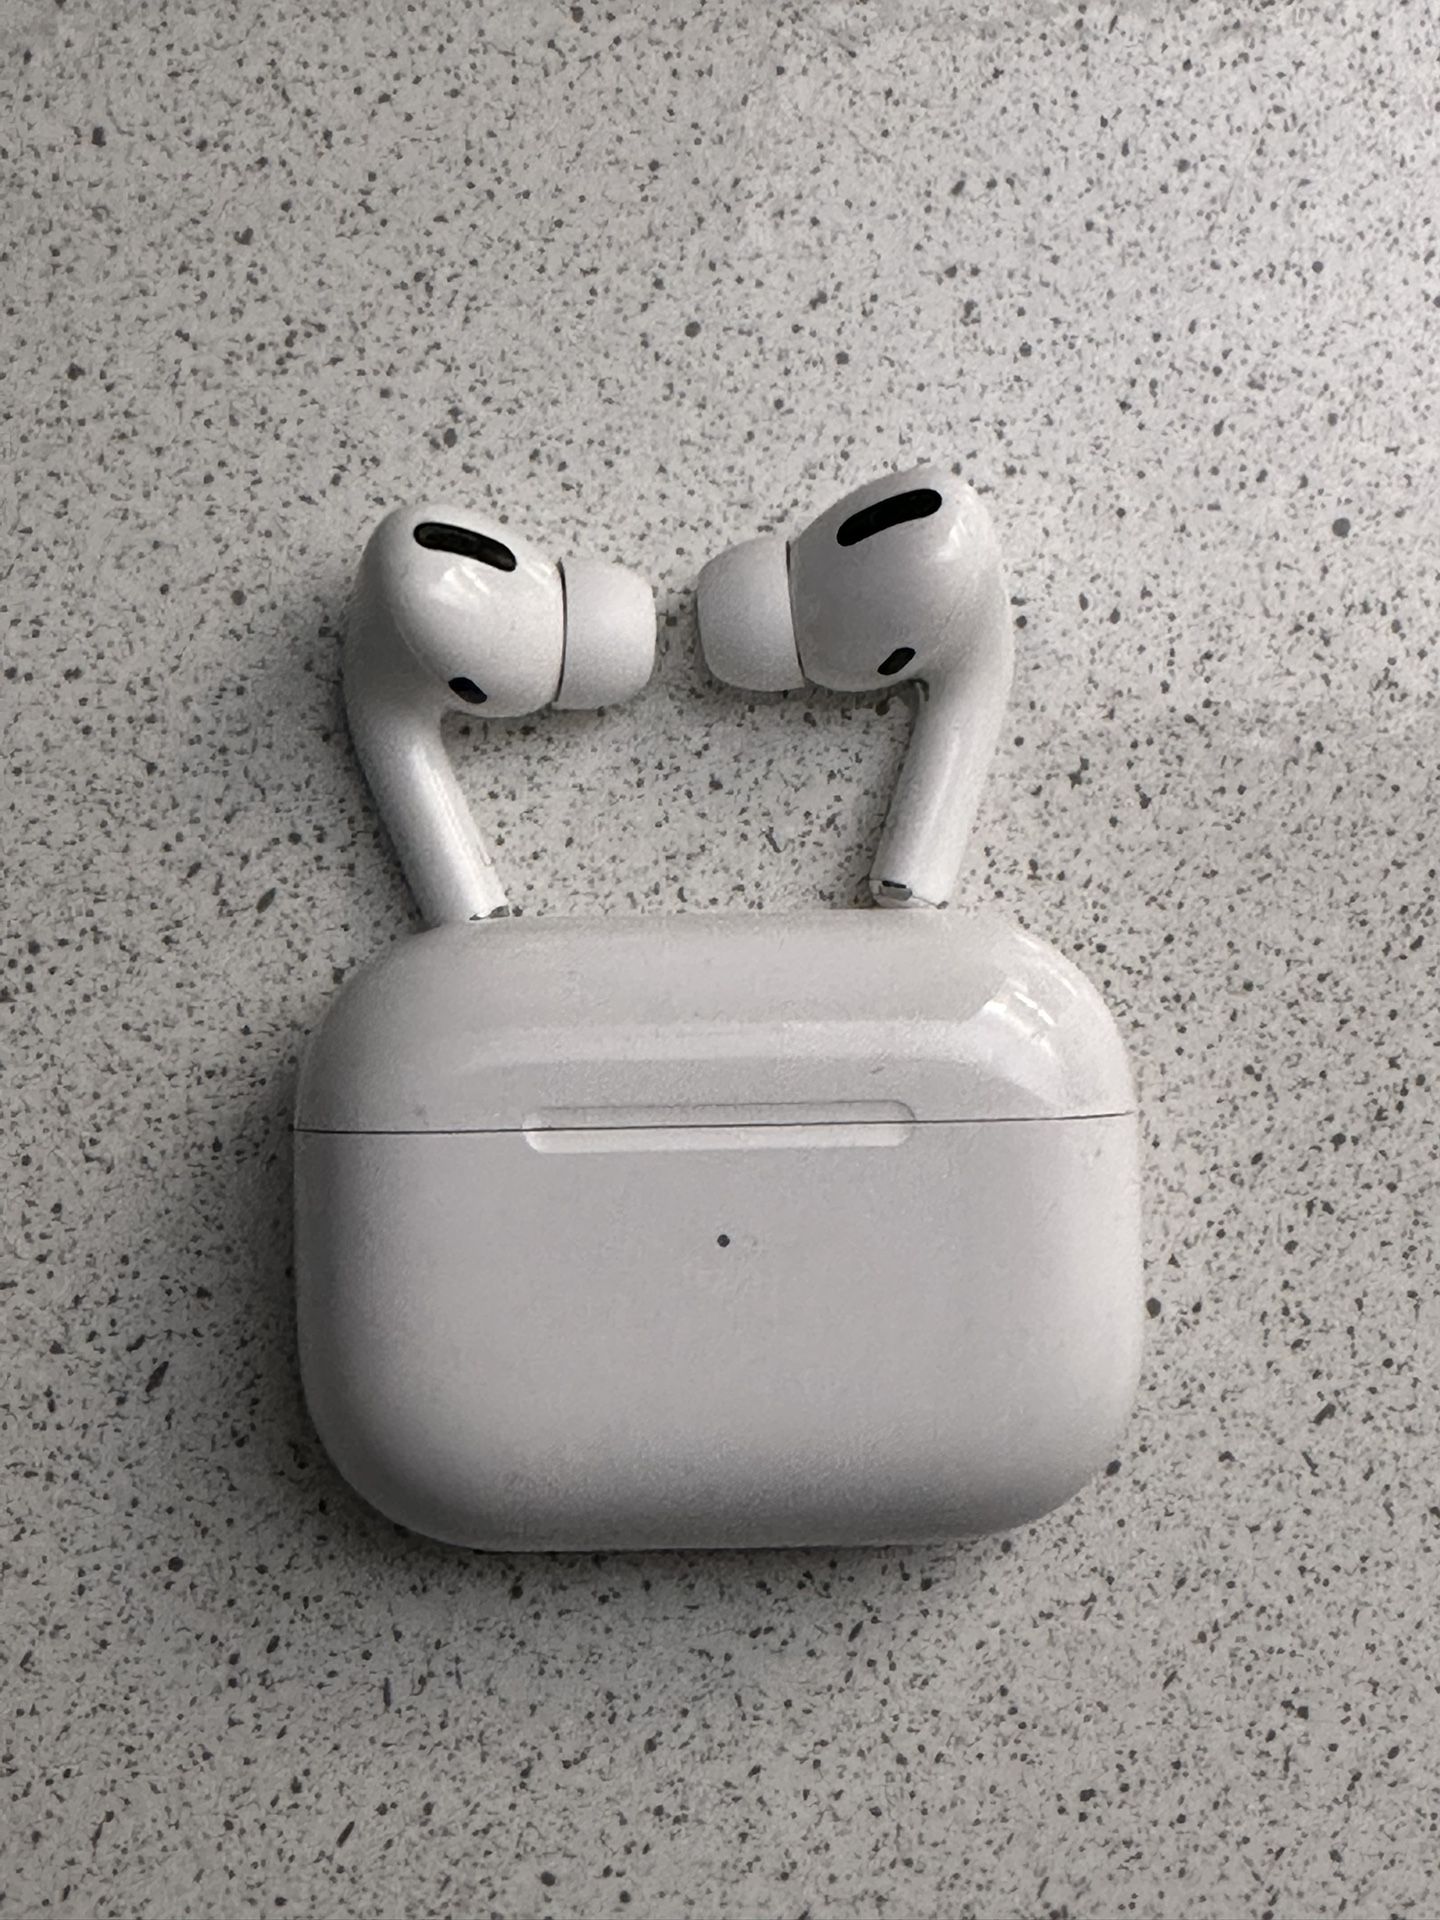 Airpods Pro (1st Generation) for sale